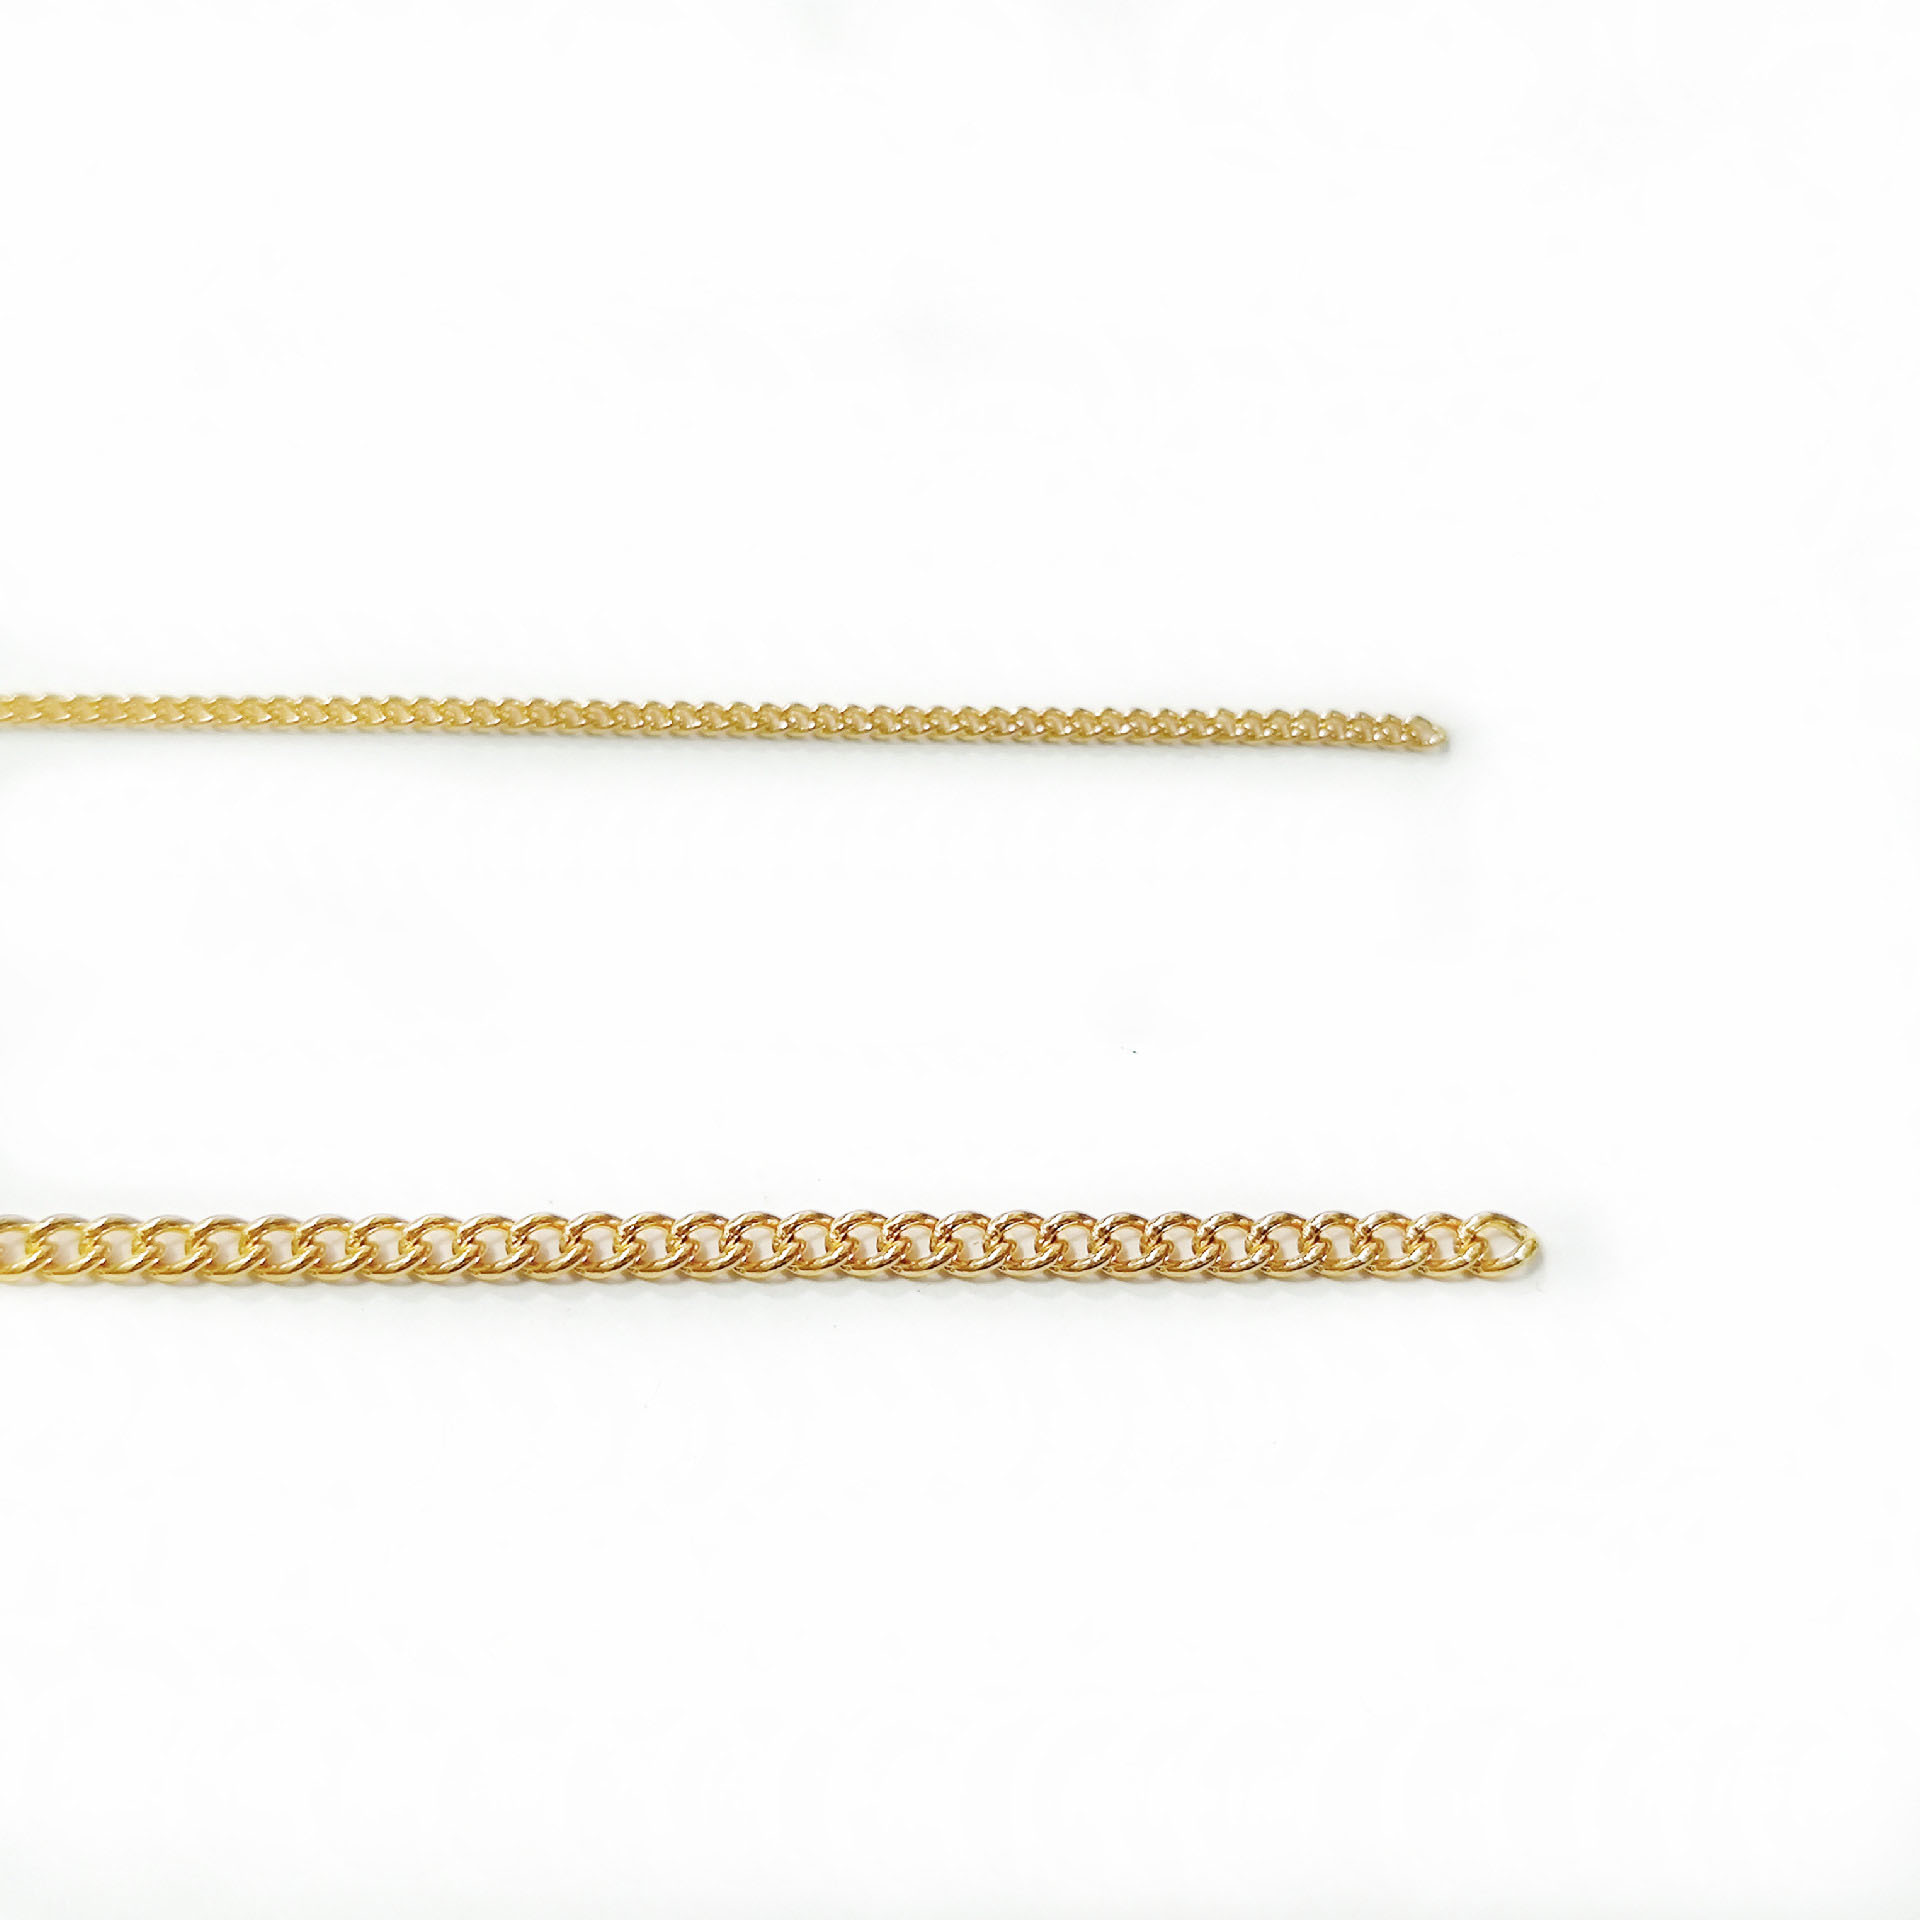 8:0.5 line*chain width 2.0mm gold